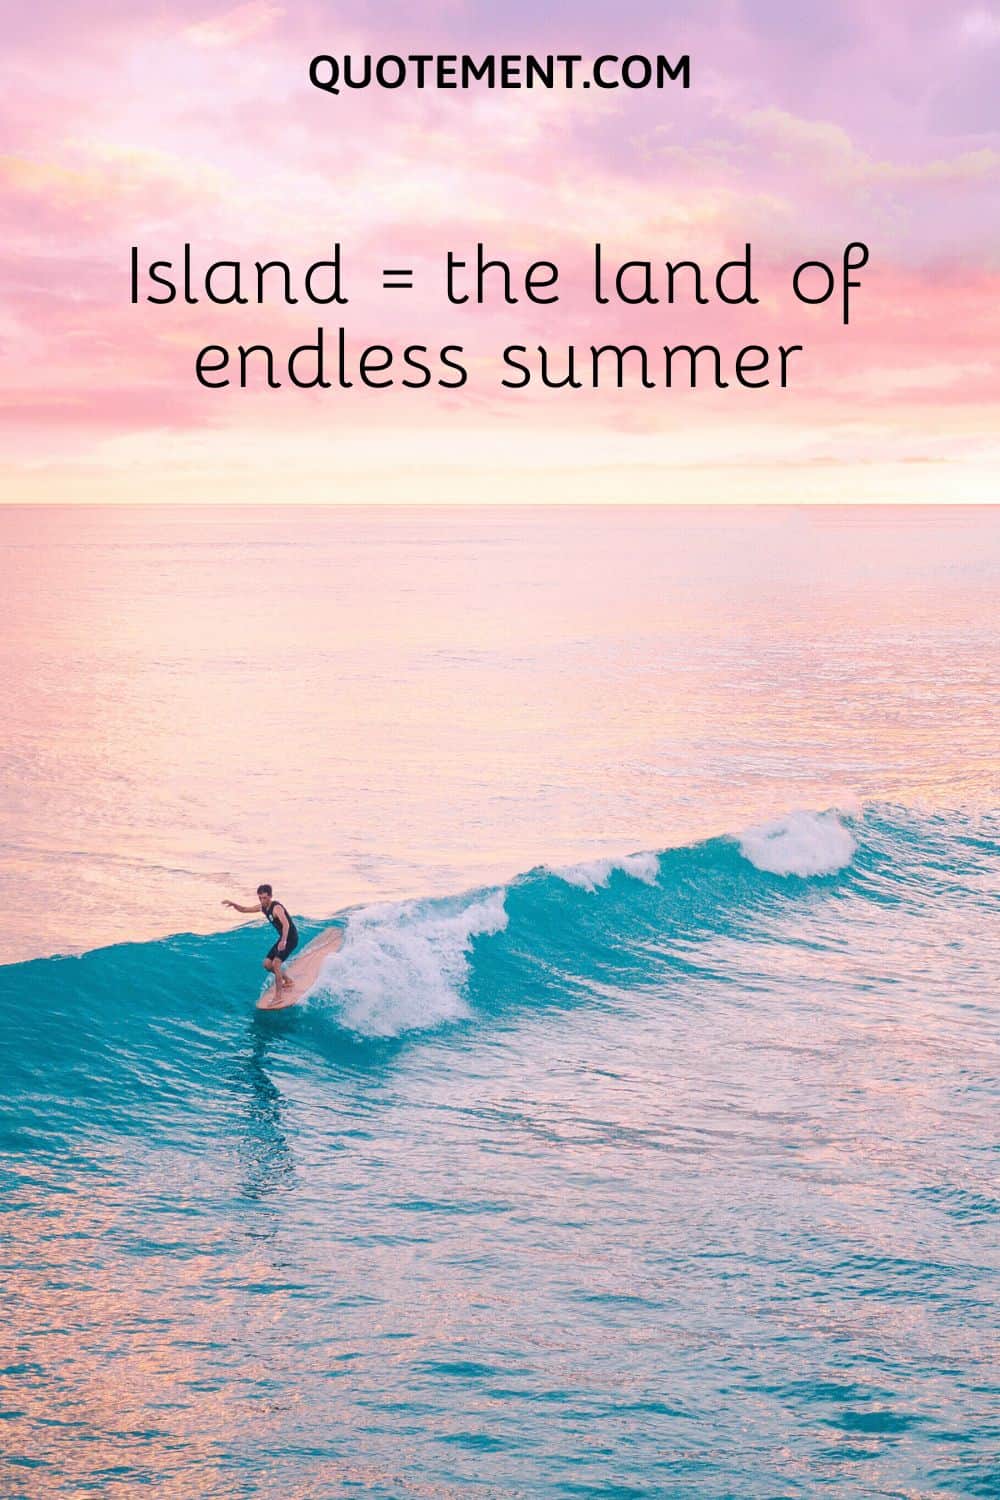 Island = the land of endless summer.